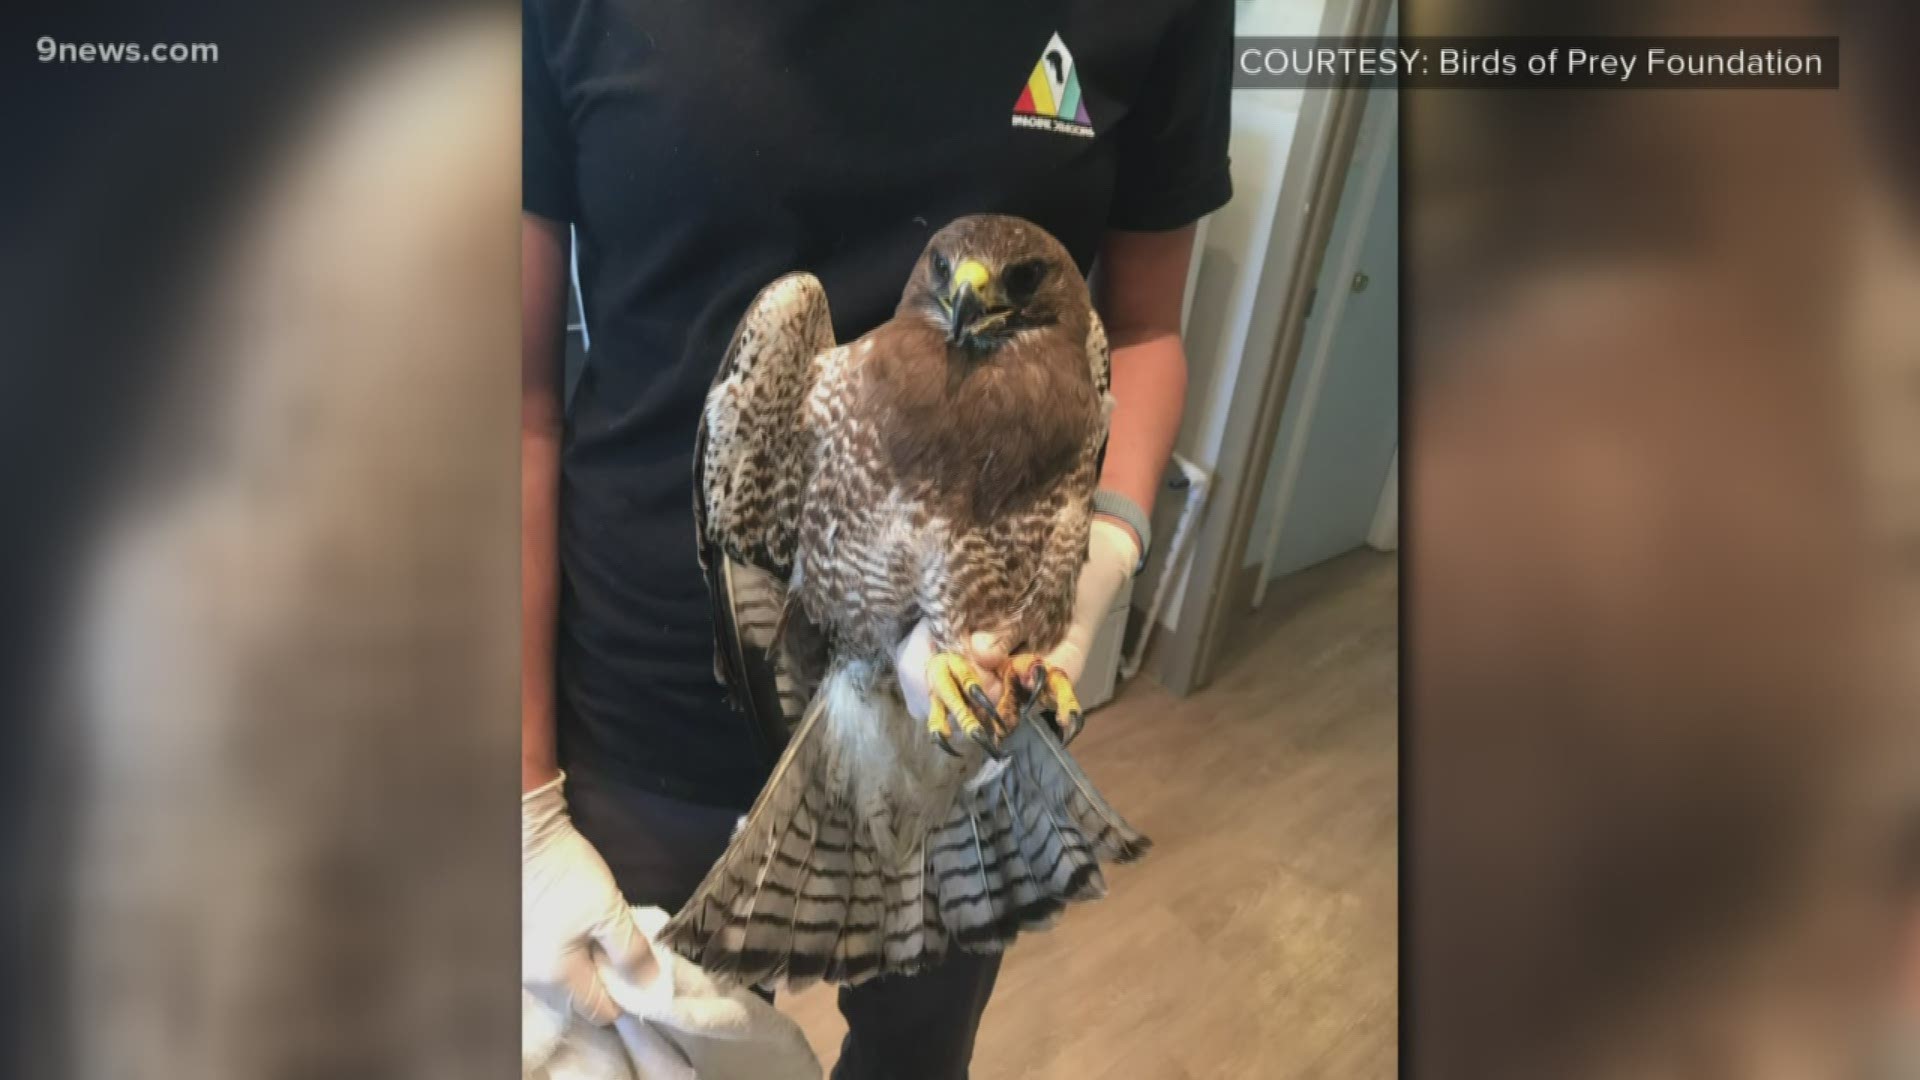 “It is illegal to shoot or kill birds of prey and other protected species,” said CPW District Wildlife Officer Jordan Likes.